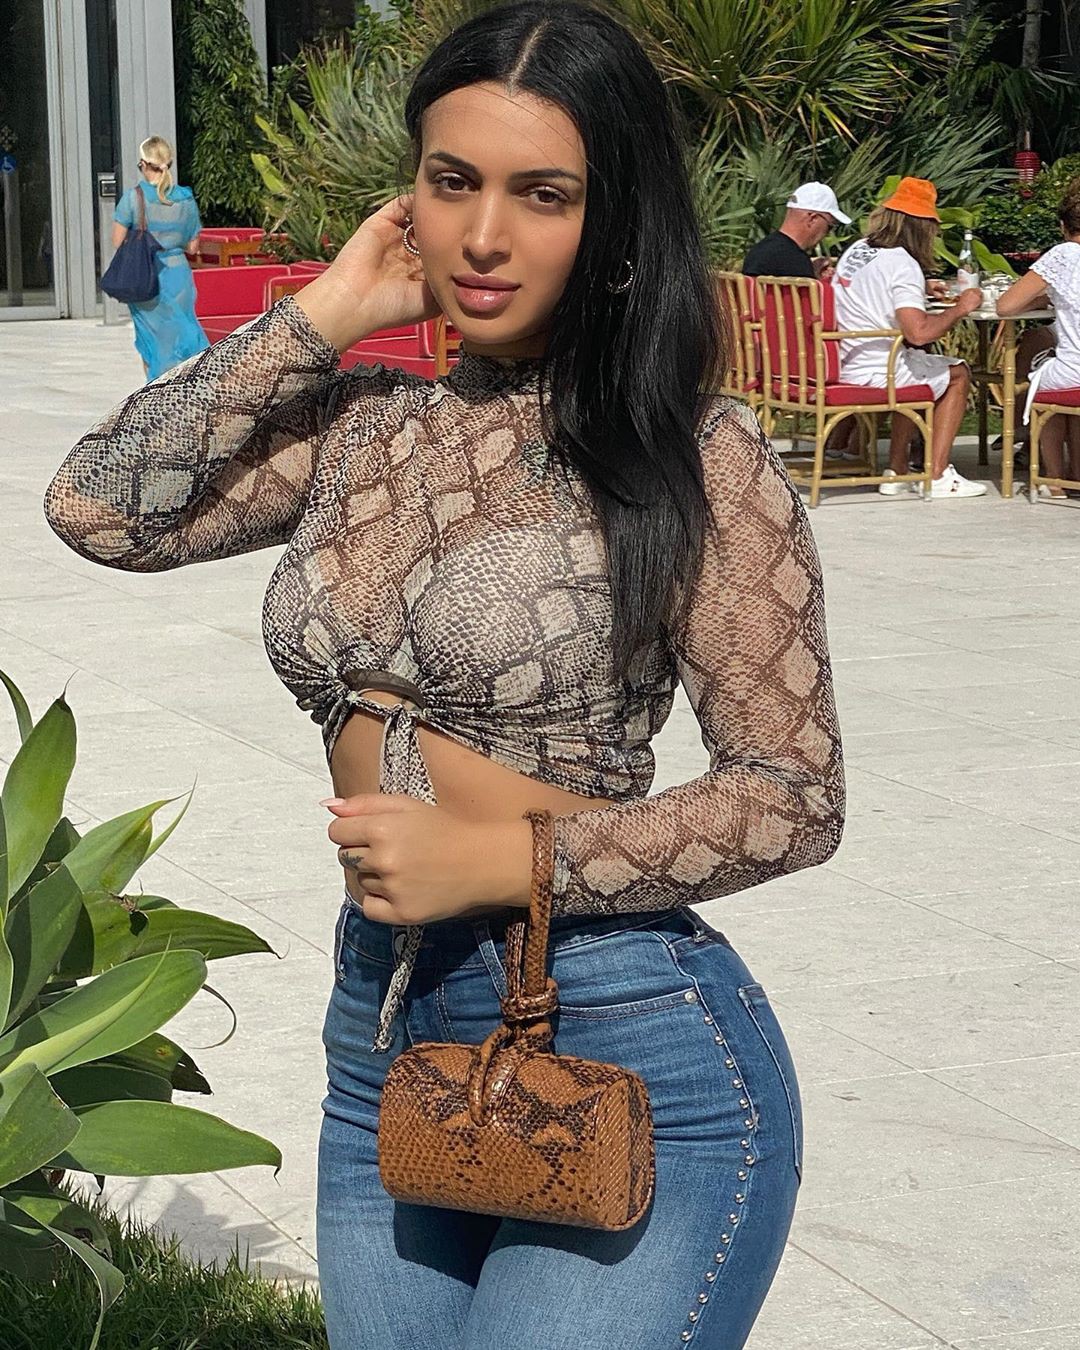 Nebby Fusco jeans style outfit, photoshoot ideas, Natural Black Hair: Instagram girls,  Jeans Outfit  